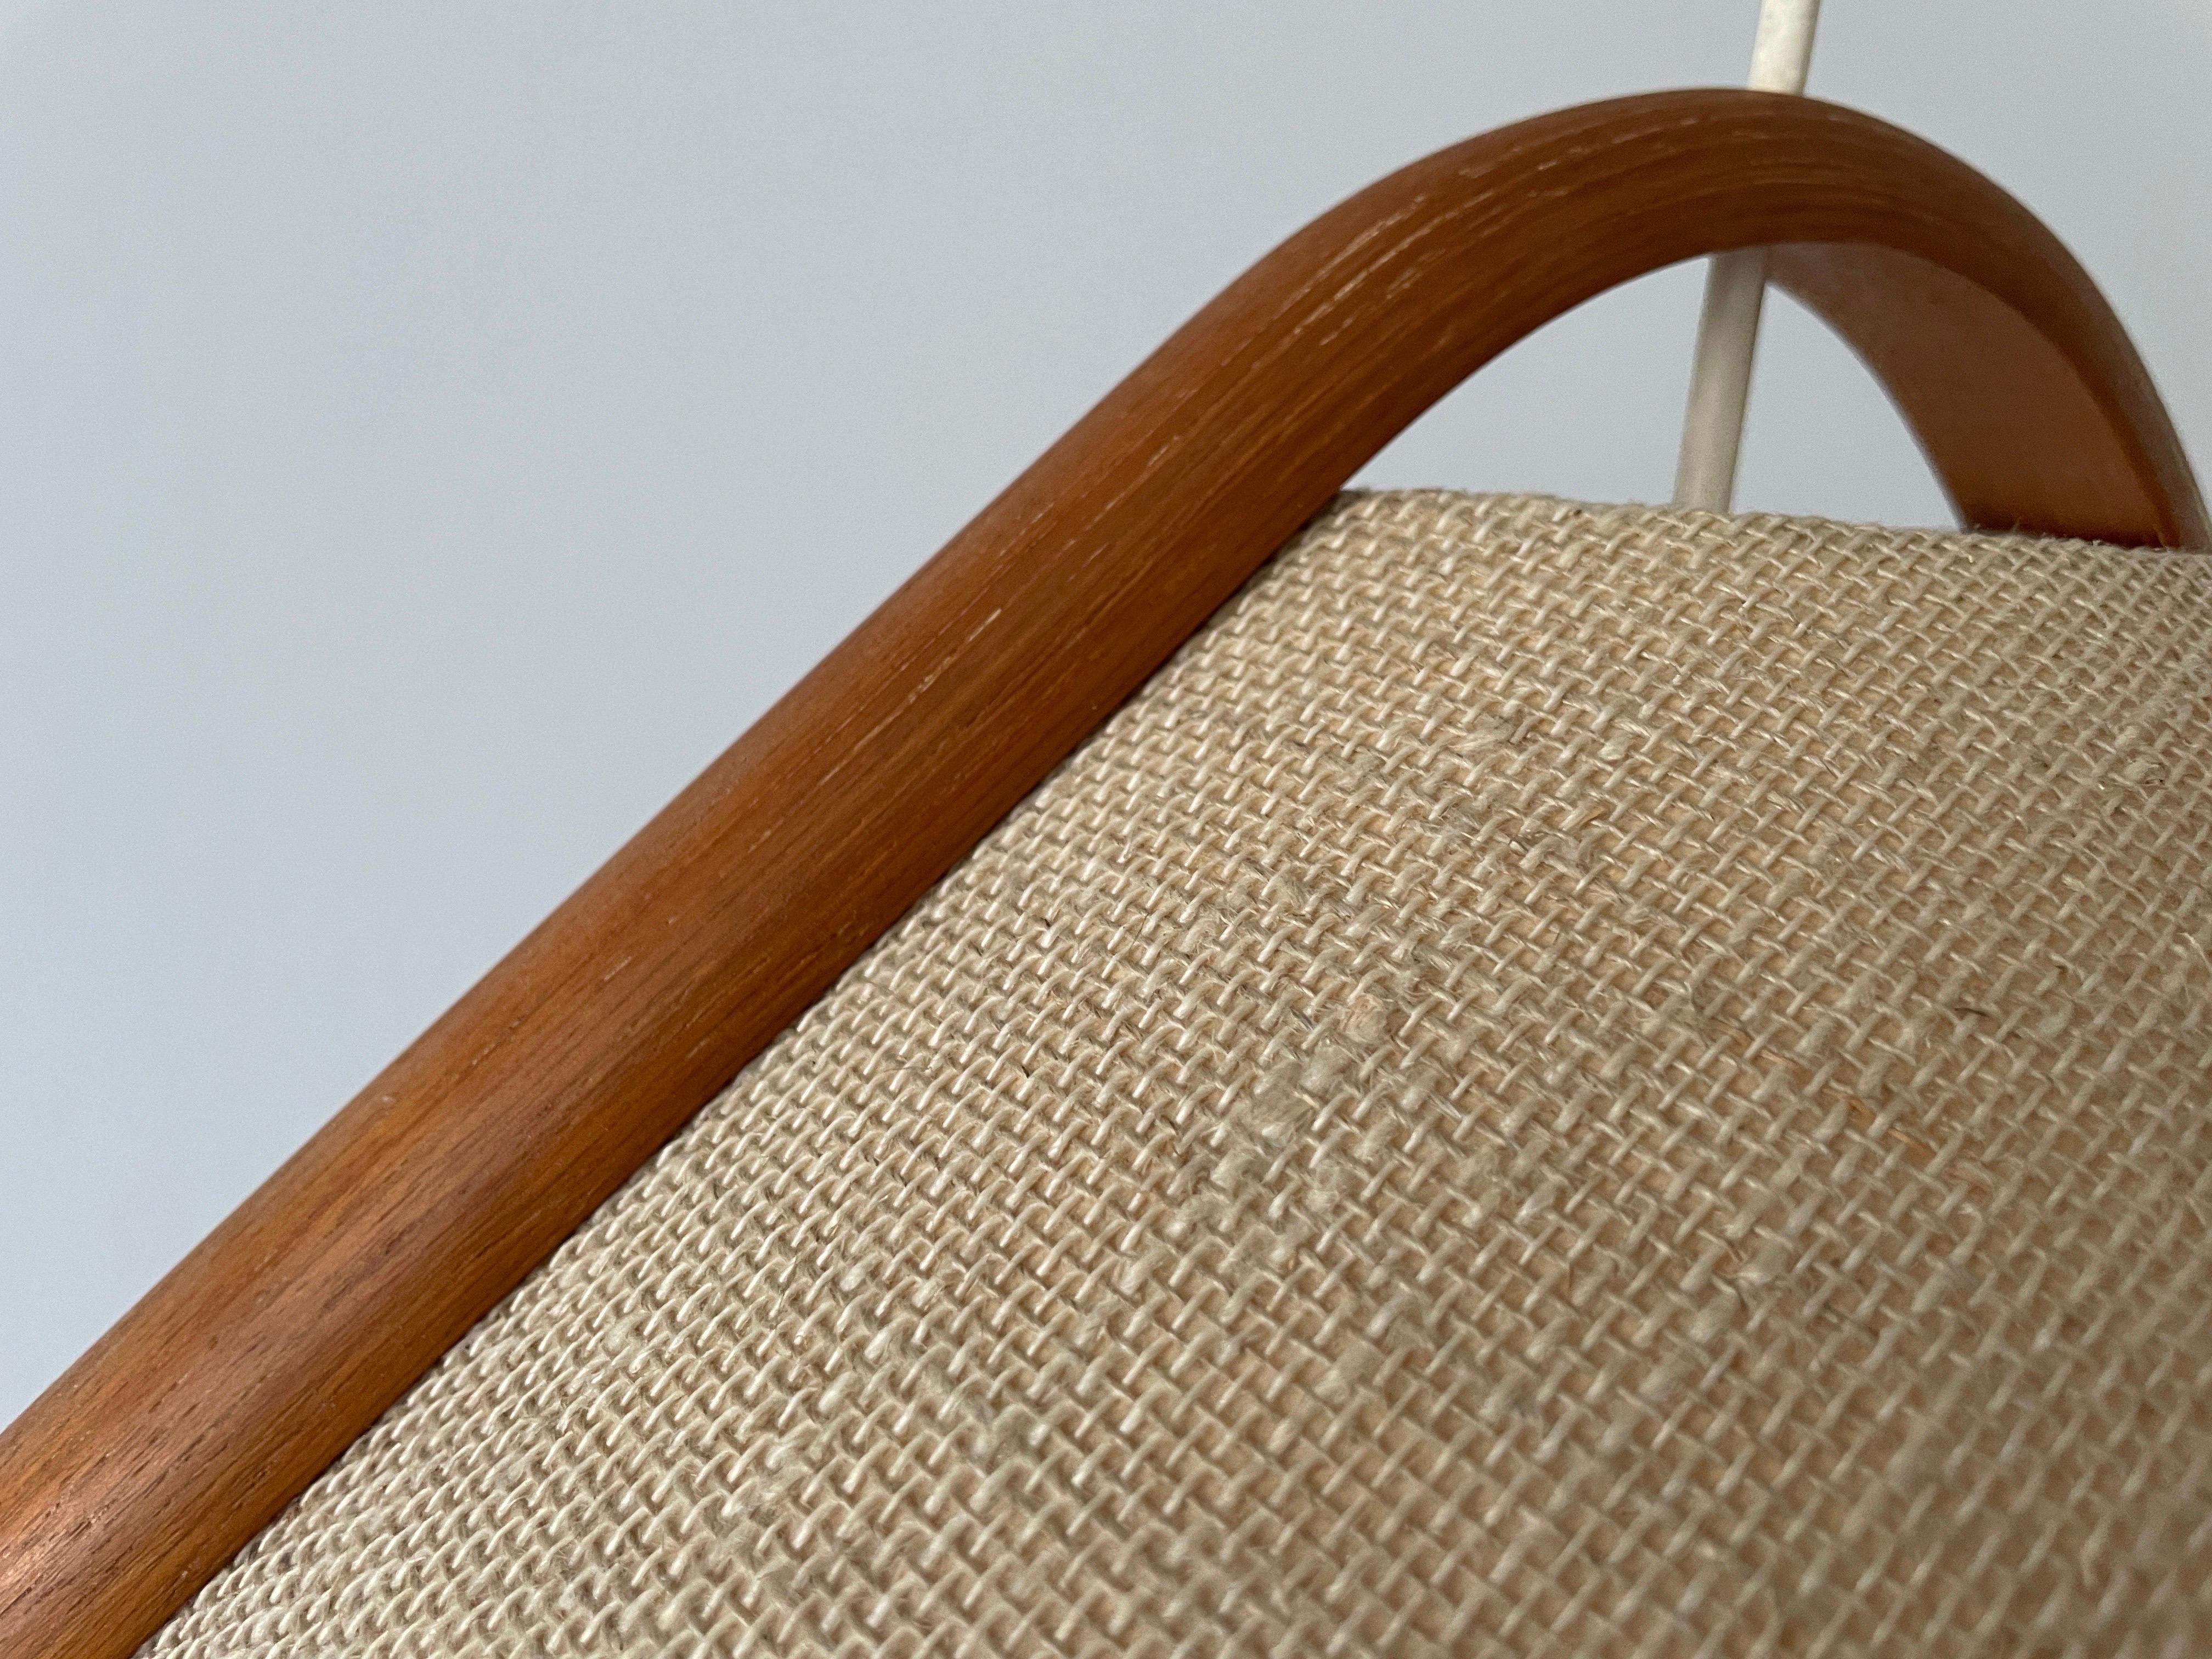 Conic Design Fabric Pendant Lamp with Teak Detail, 1960s, Germany For Sale 2